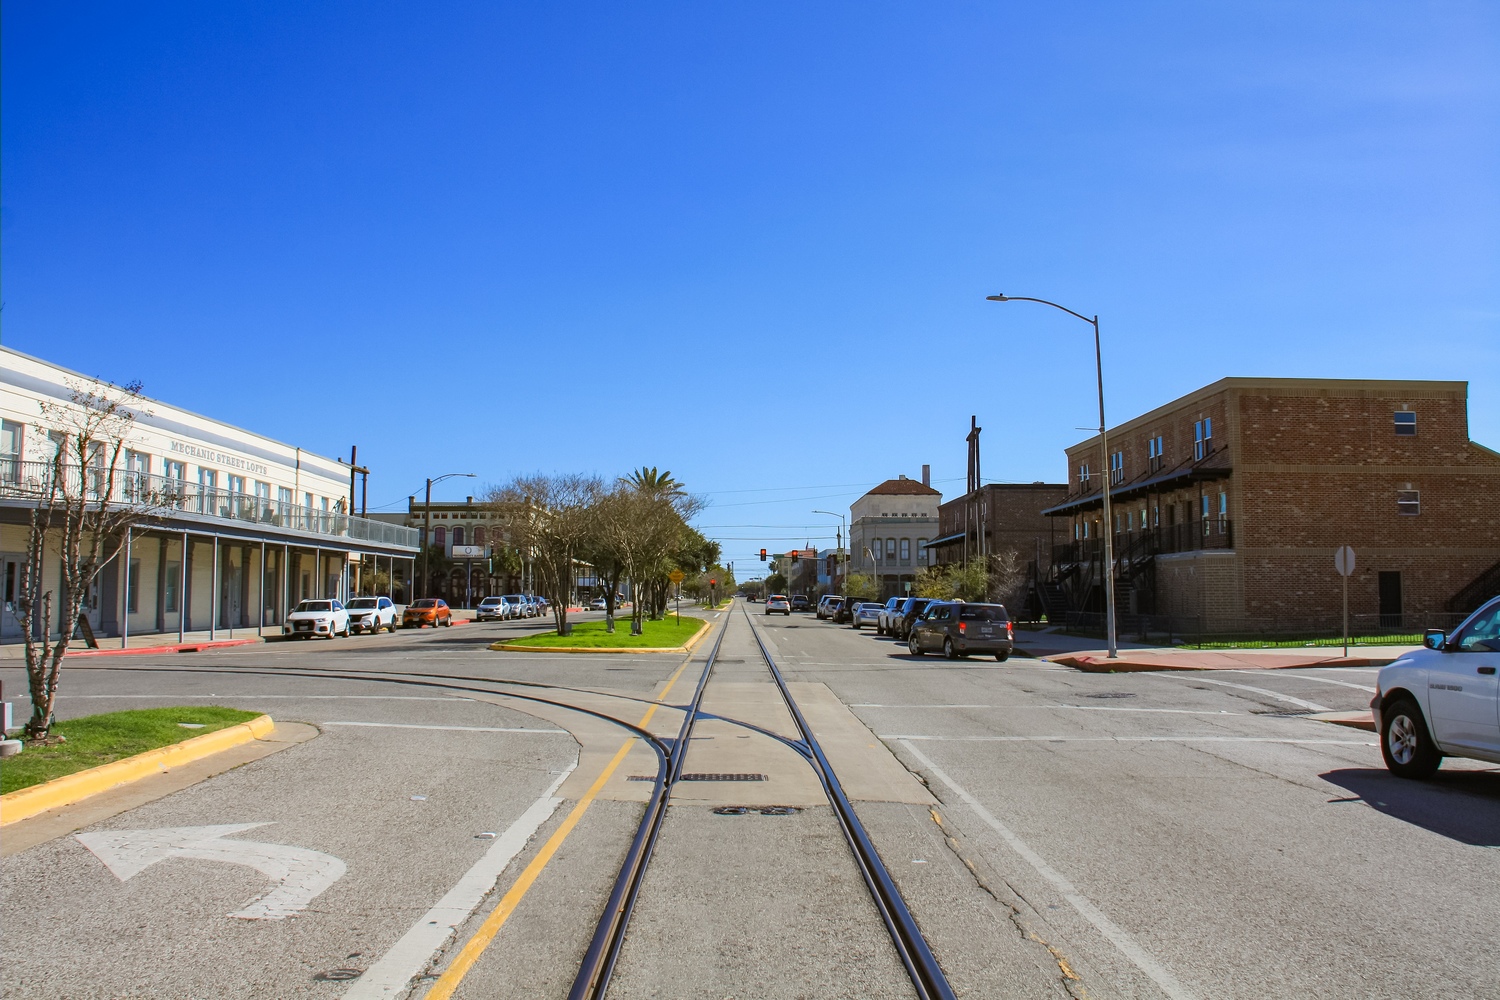 Galveston — Tramway Lines and Infrastructure